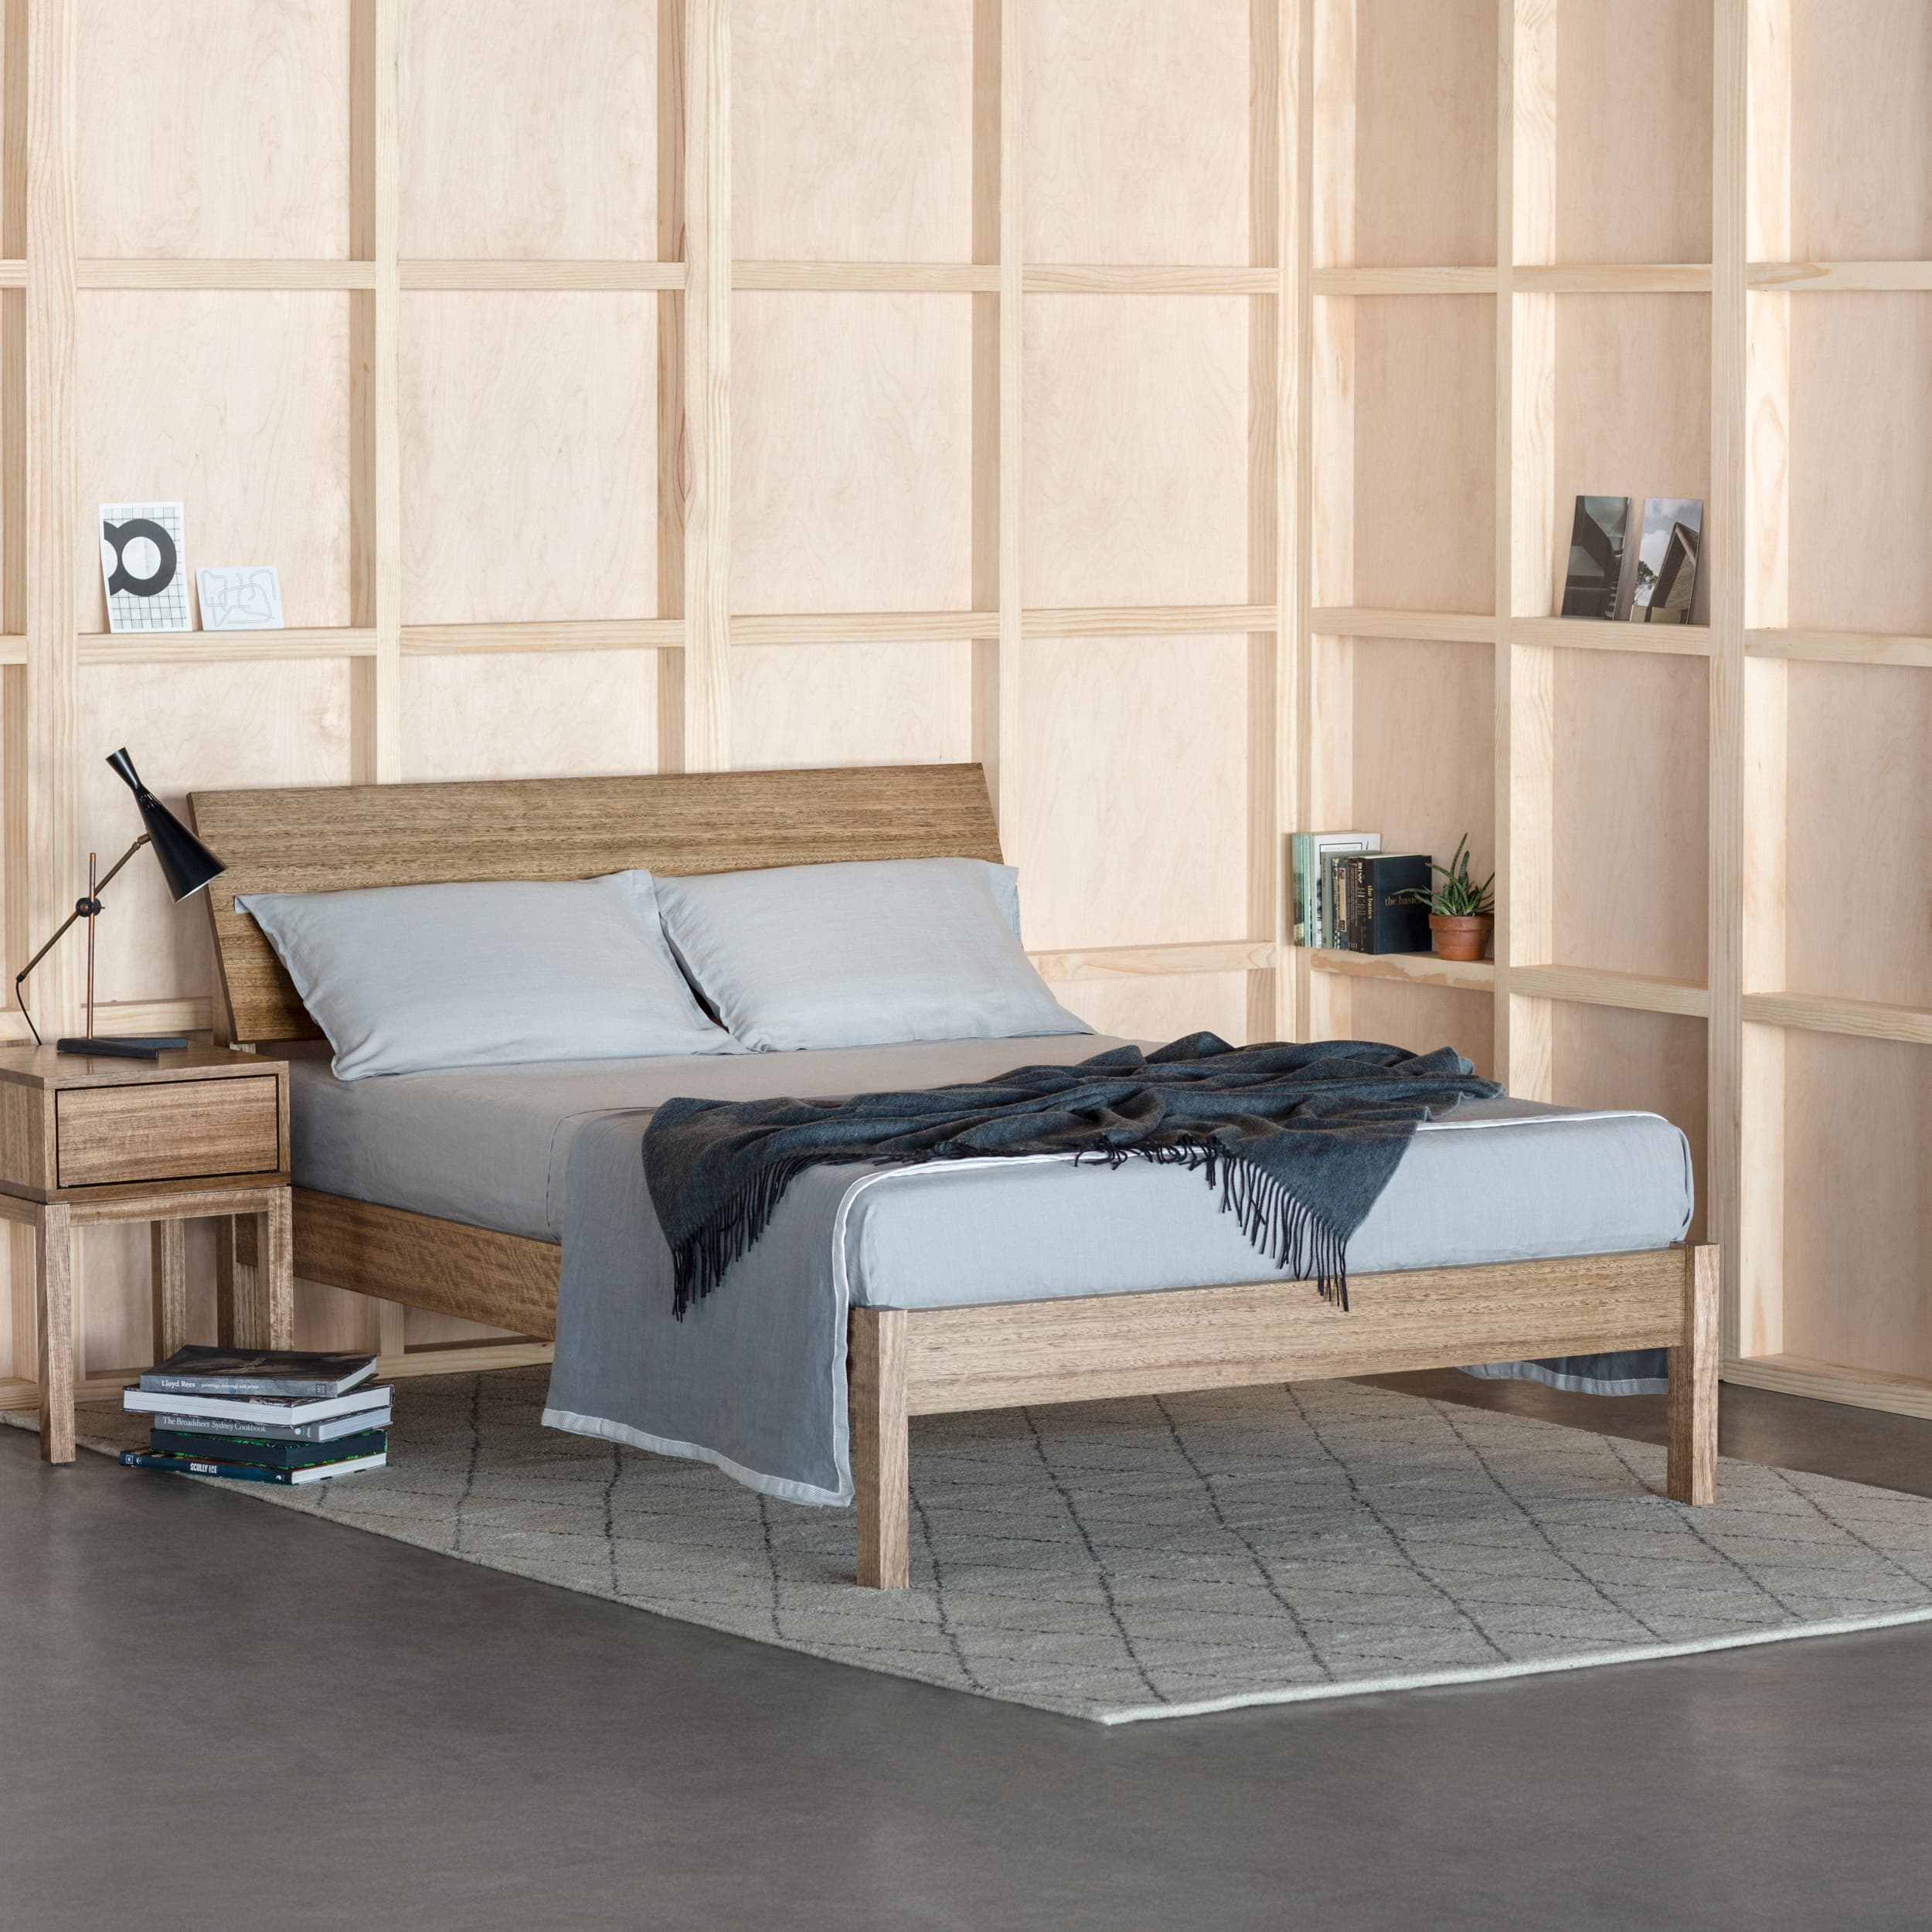 Oscar with Headboard Timber Bed Frame